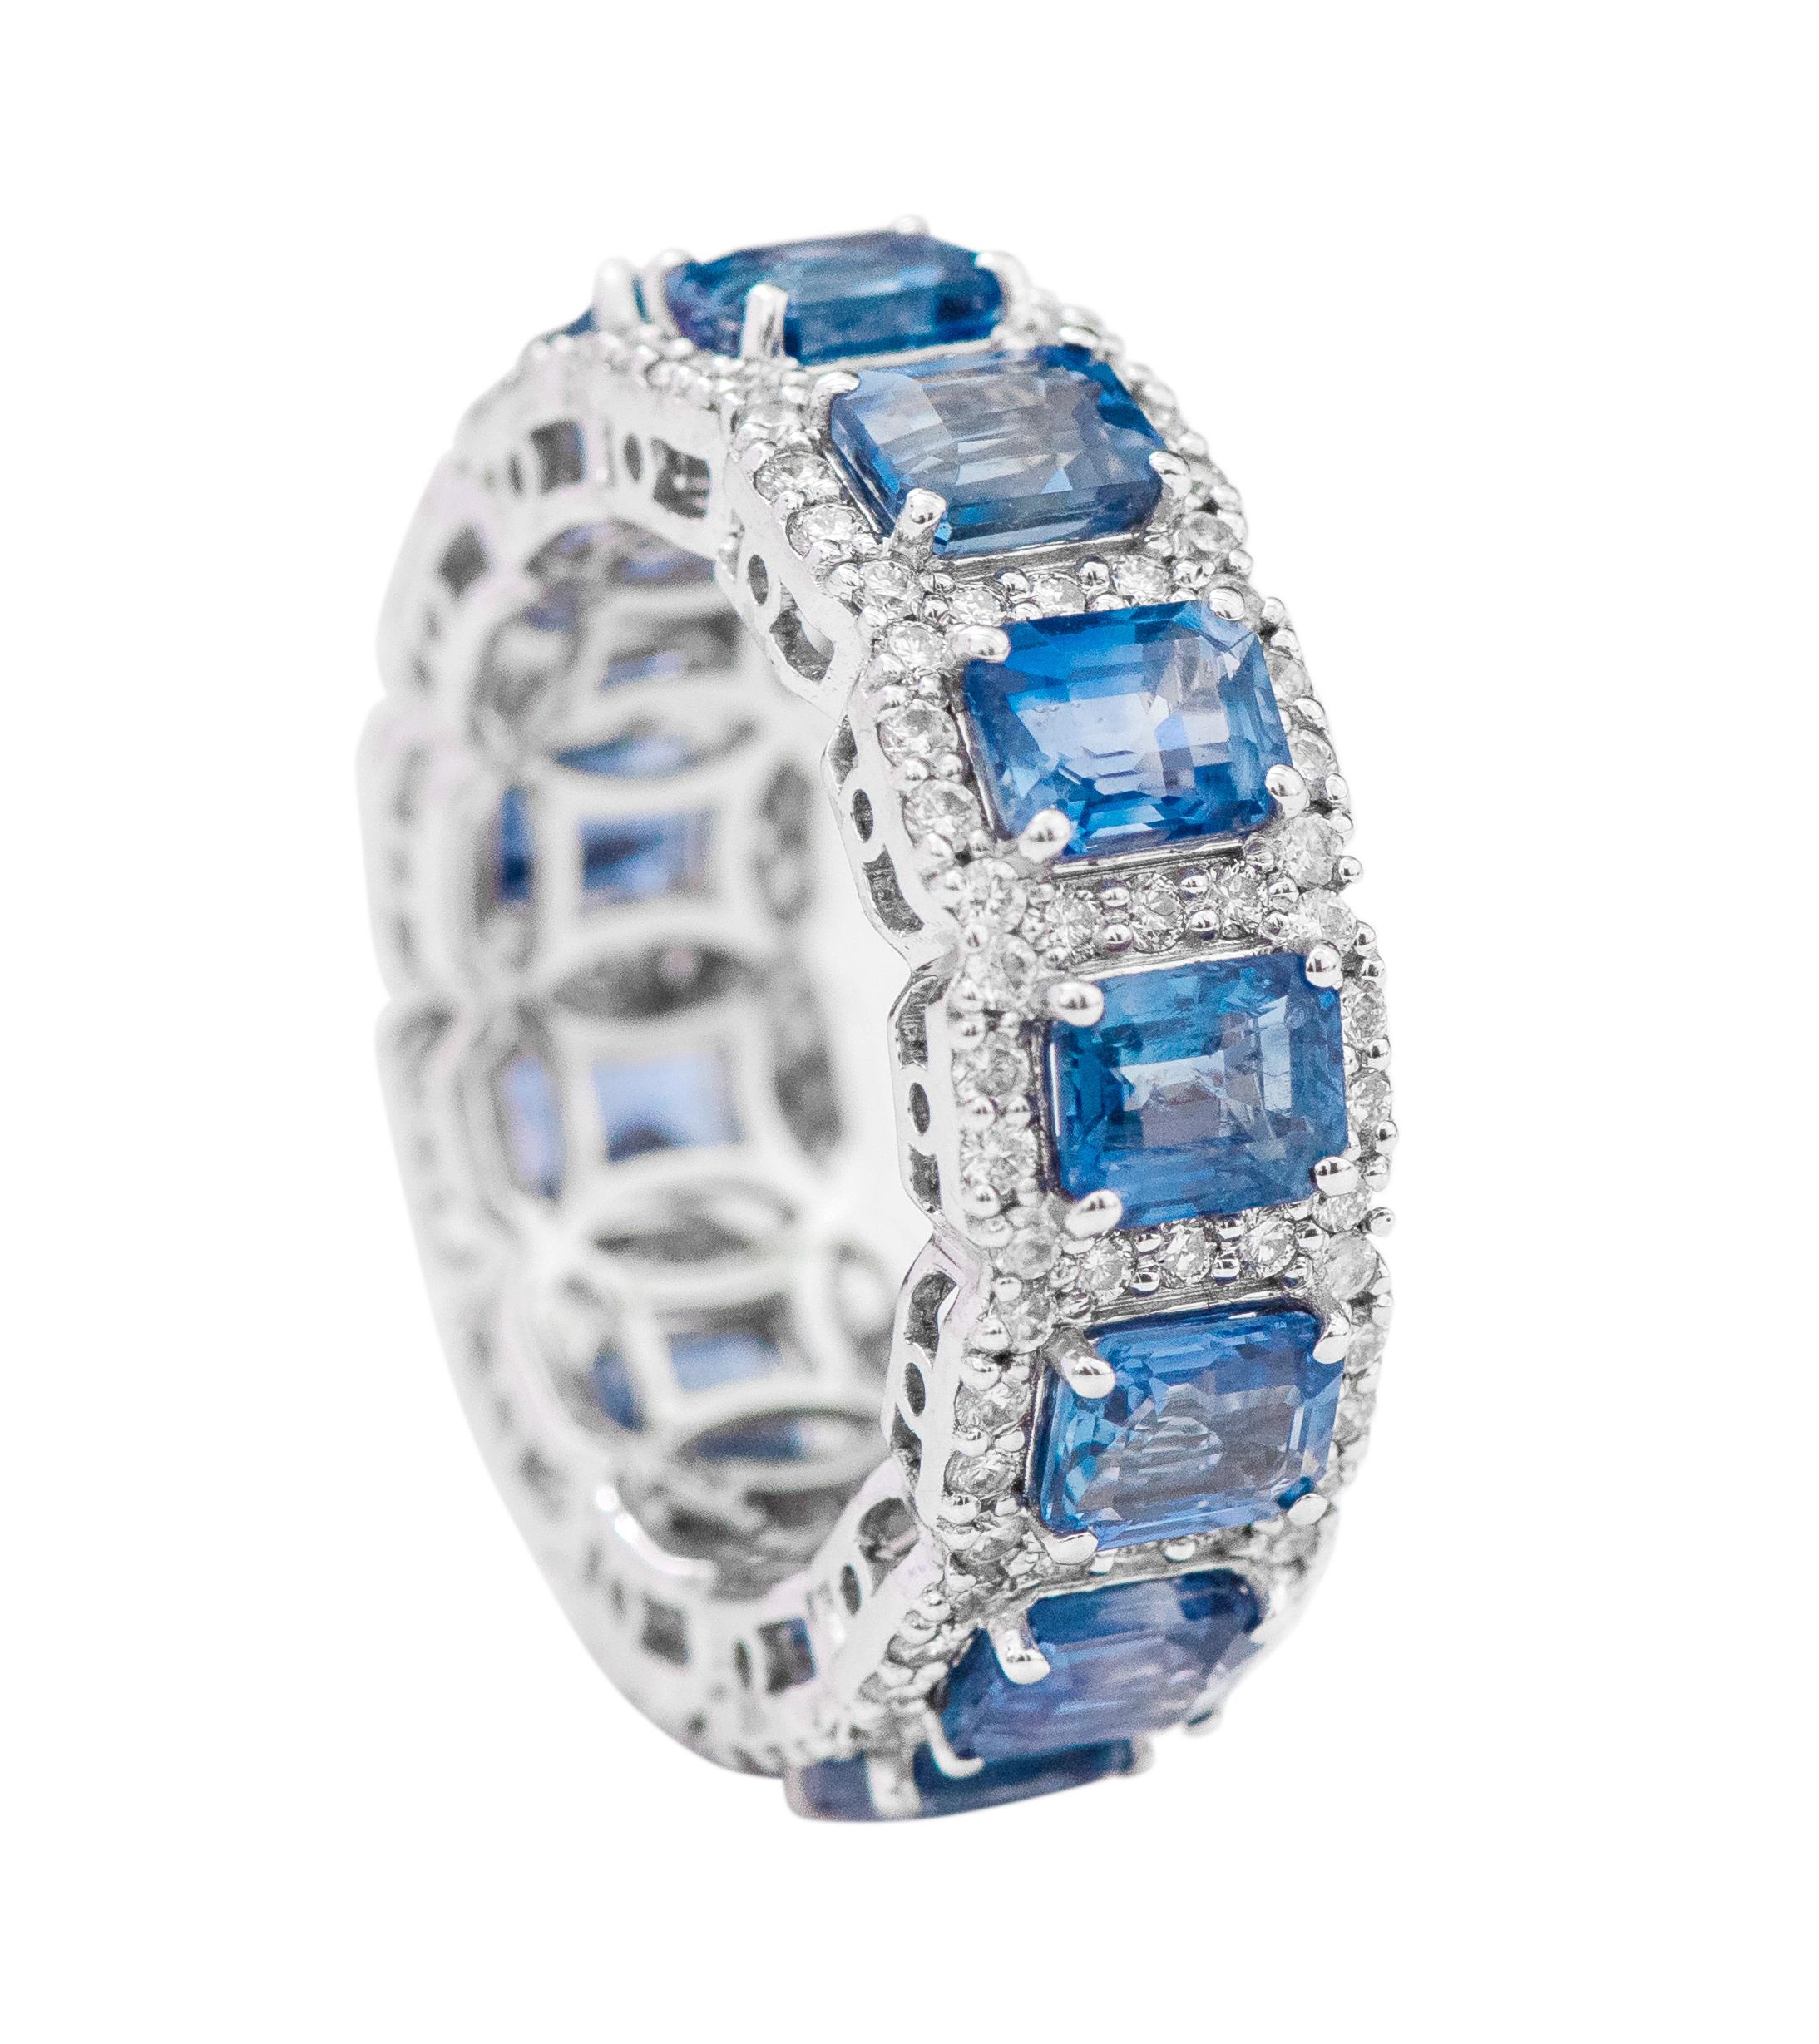 18 Karat White Gold 7.81 Carat Emerald-Cut Sapphire and Diamond Eternity Band Ring

This incredible ocean blue sapphire and diamond cluster band is remarkably brilliant. The solitaire emerald cut sapphires are magnificently surrounded with a merged